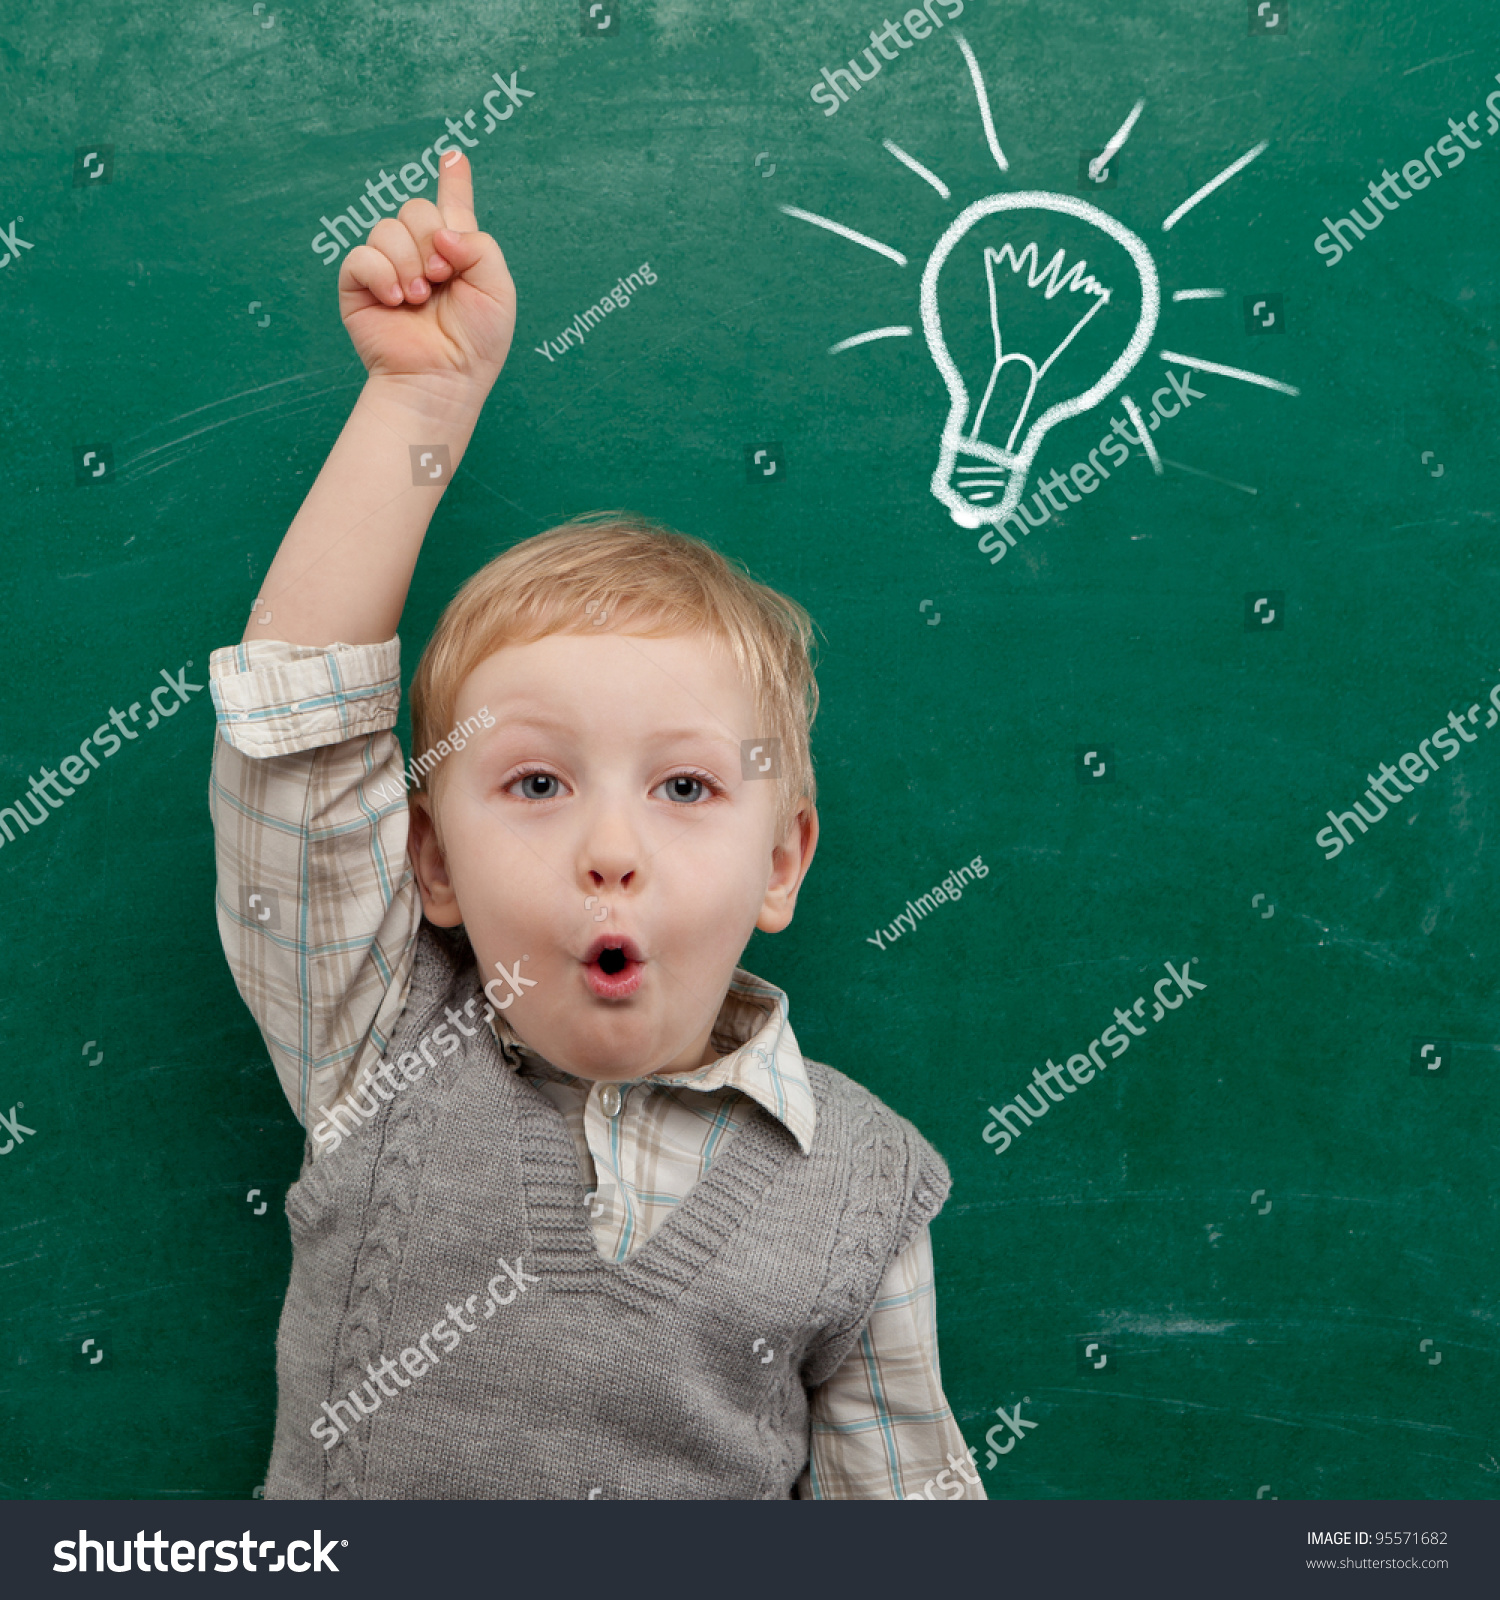 Cheerful smiling child at the blackboard. School concept #95571682